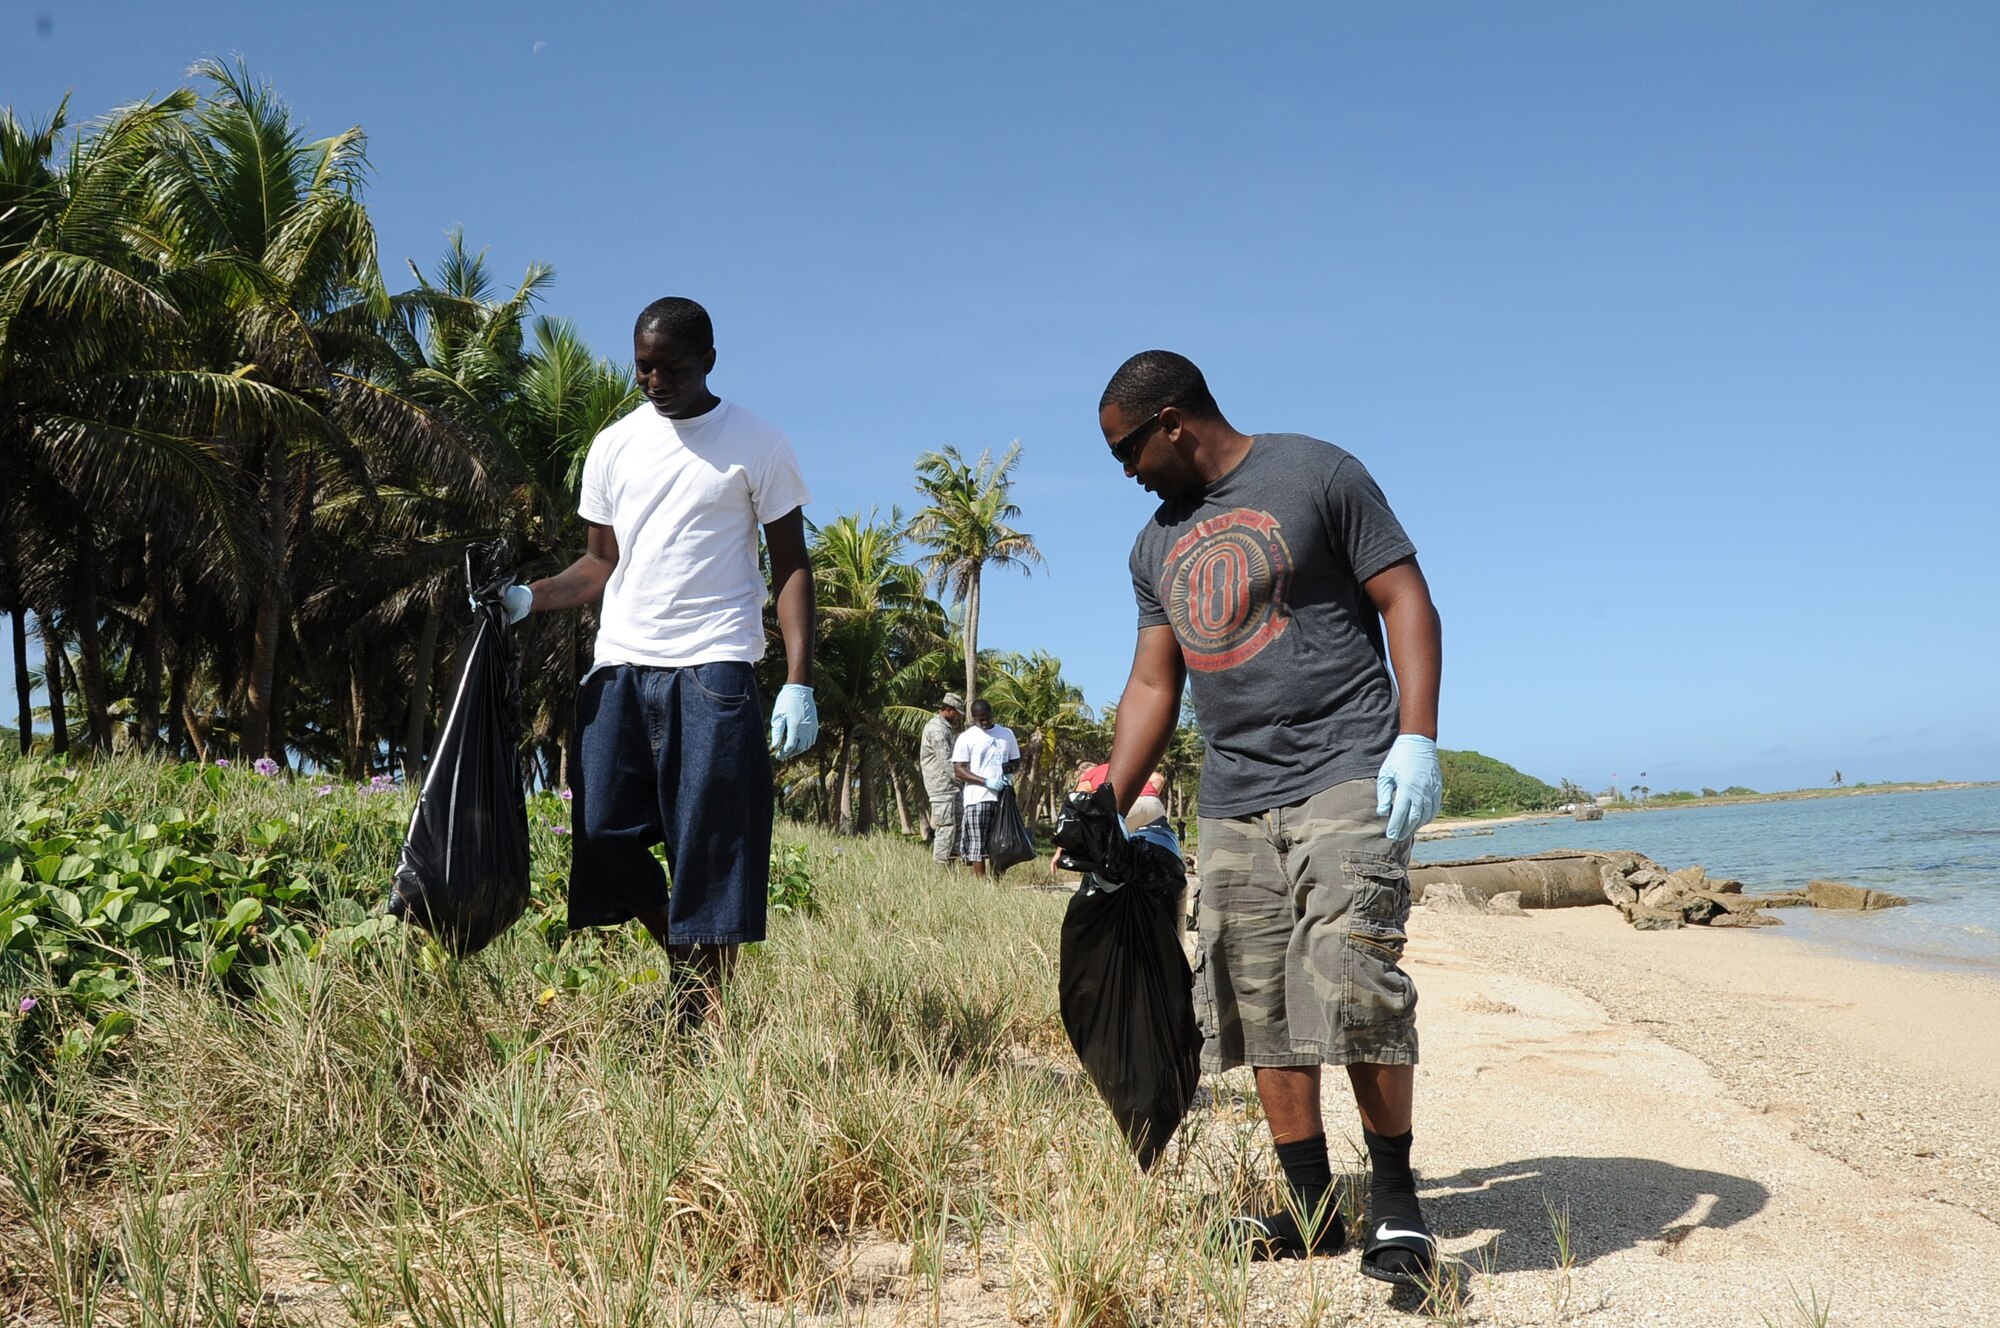 Airman 1st Class Gregory Jones-Fields, (left), and Airman 1st Class Keith Kennedy, both weapons personnel from the 36th Maintenance Squadron, participate in a beach cleanup at Asan Beach, Guam, Dec. 7, 2012, as part of their Weapons Day of Caring. The cleanup was organized in remembrance of the attacks on Pearl Harbor Dec. 7, 1941. (U.S. Air  Force photo by Airman 1st Class Adarius Petty/Released)